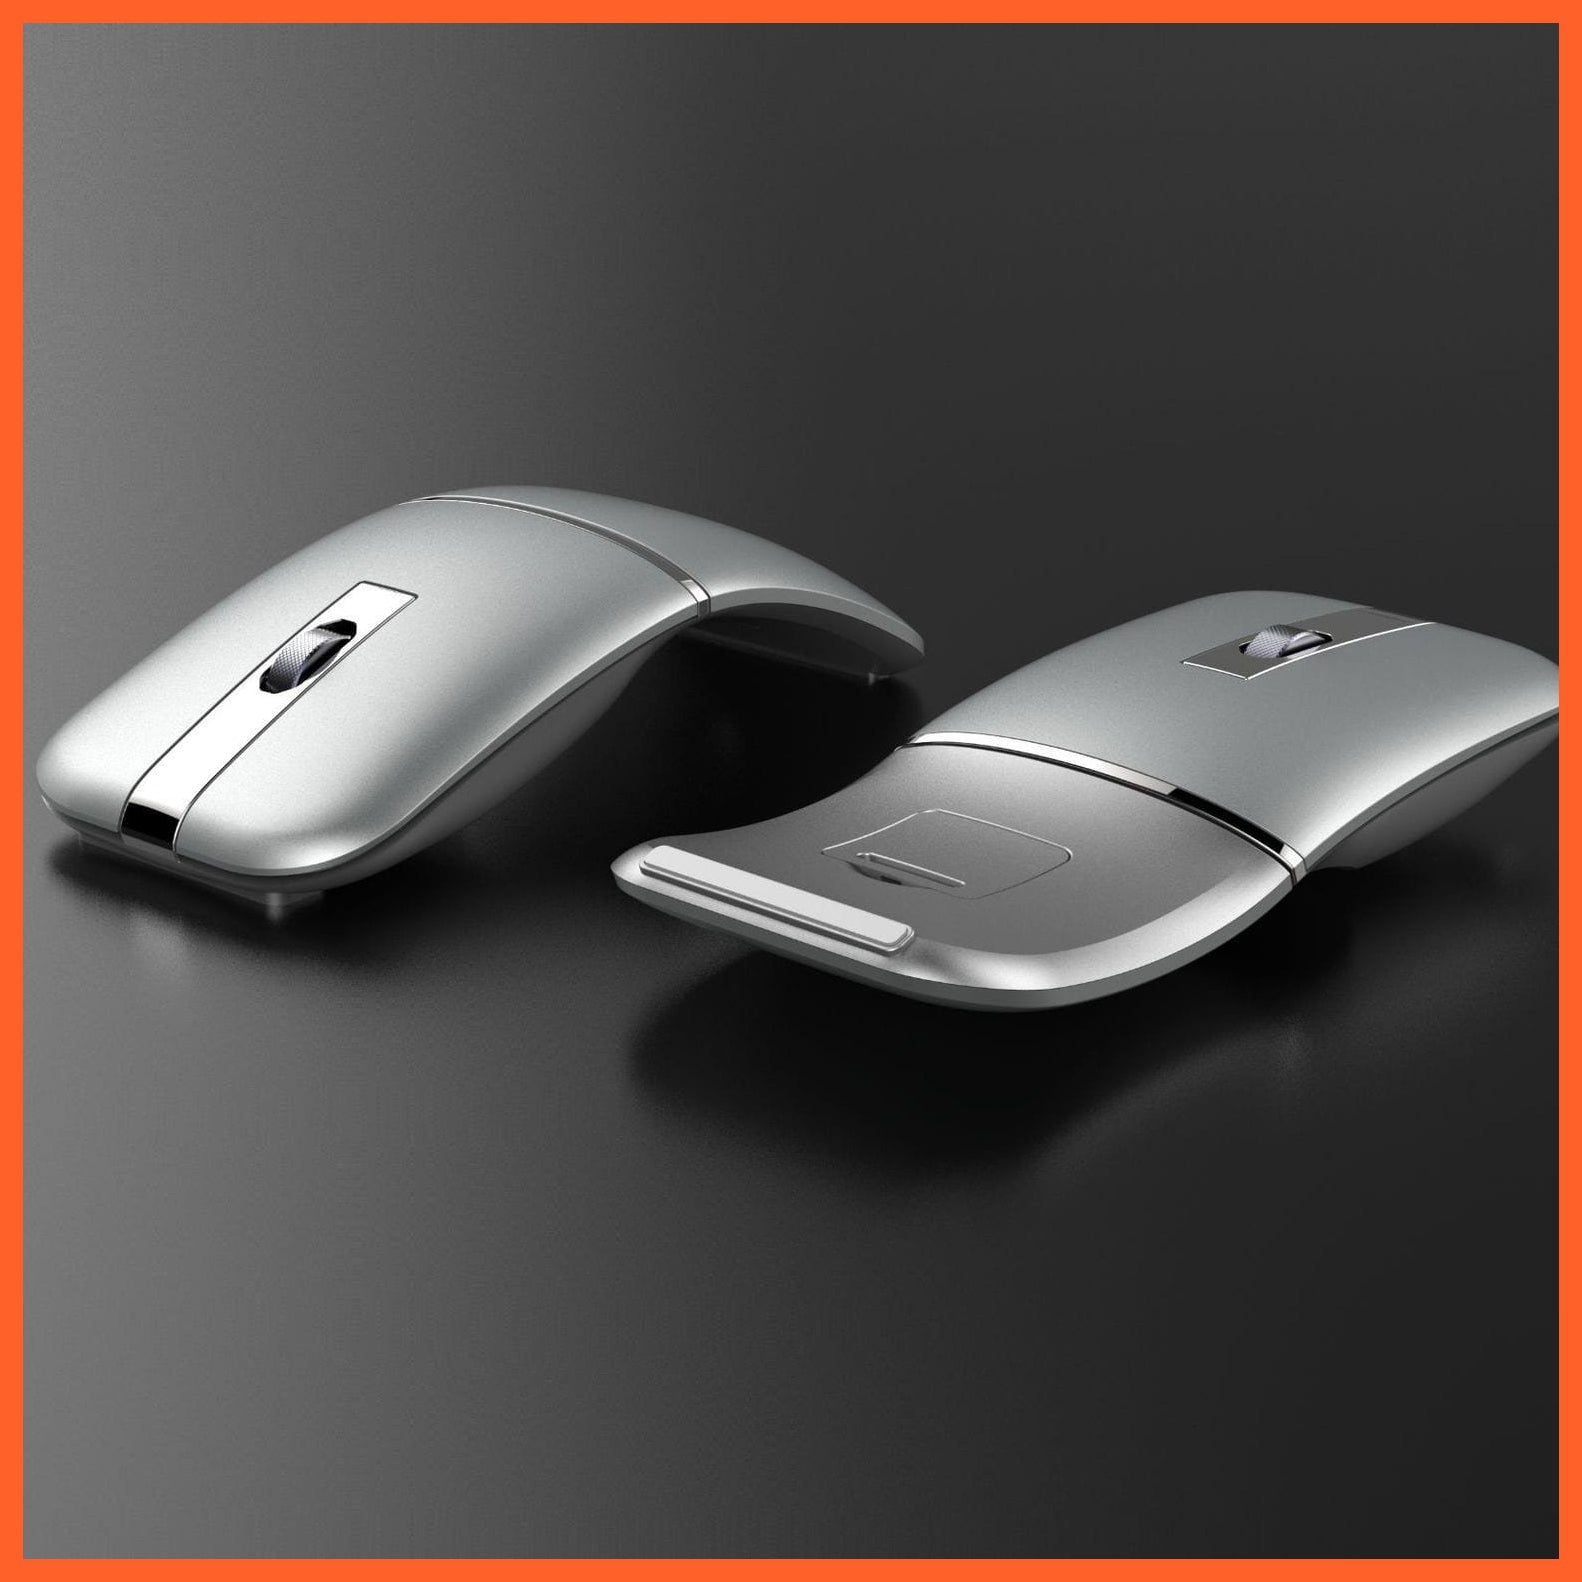 Dual-Mode Bluetooth Wireless Mouse Rechargeable Ultra-Thin Mute Desktop Laptop Office | whatagift.com.au.